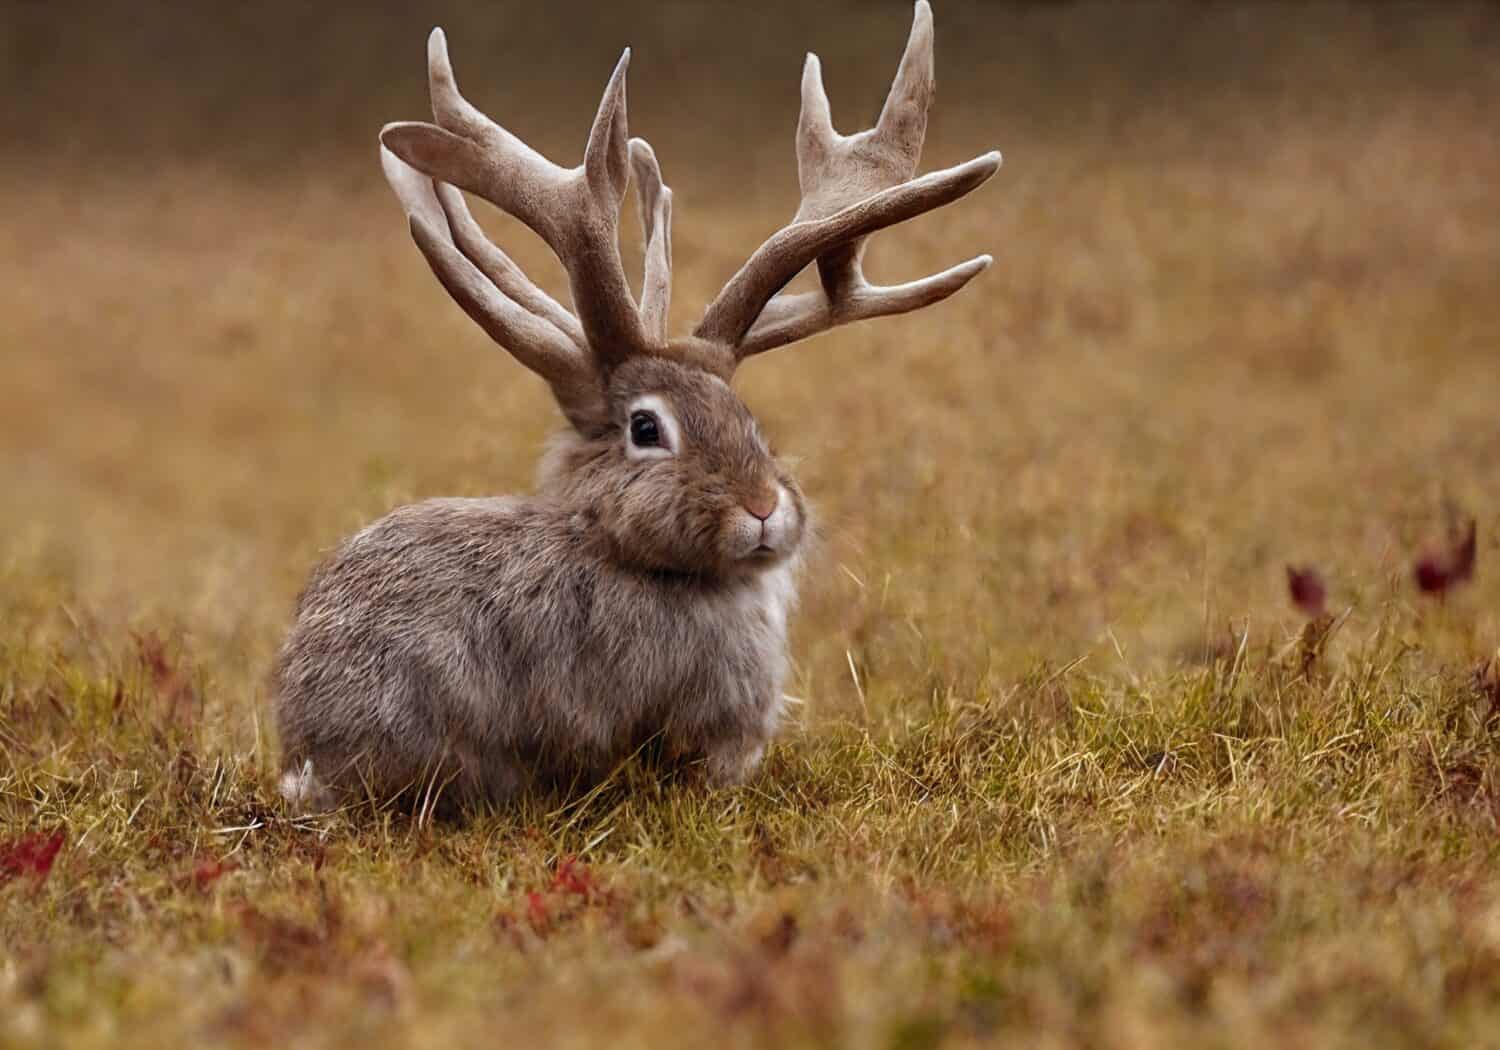 Photo of a Jackalope - A bunny rabbit with antlers, cross between jackrabbit and antelope